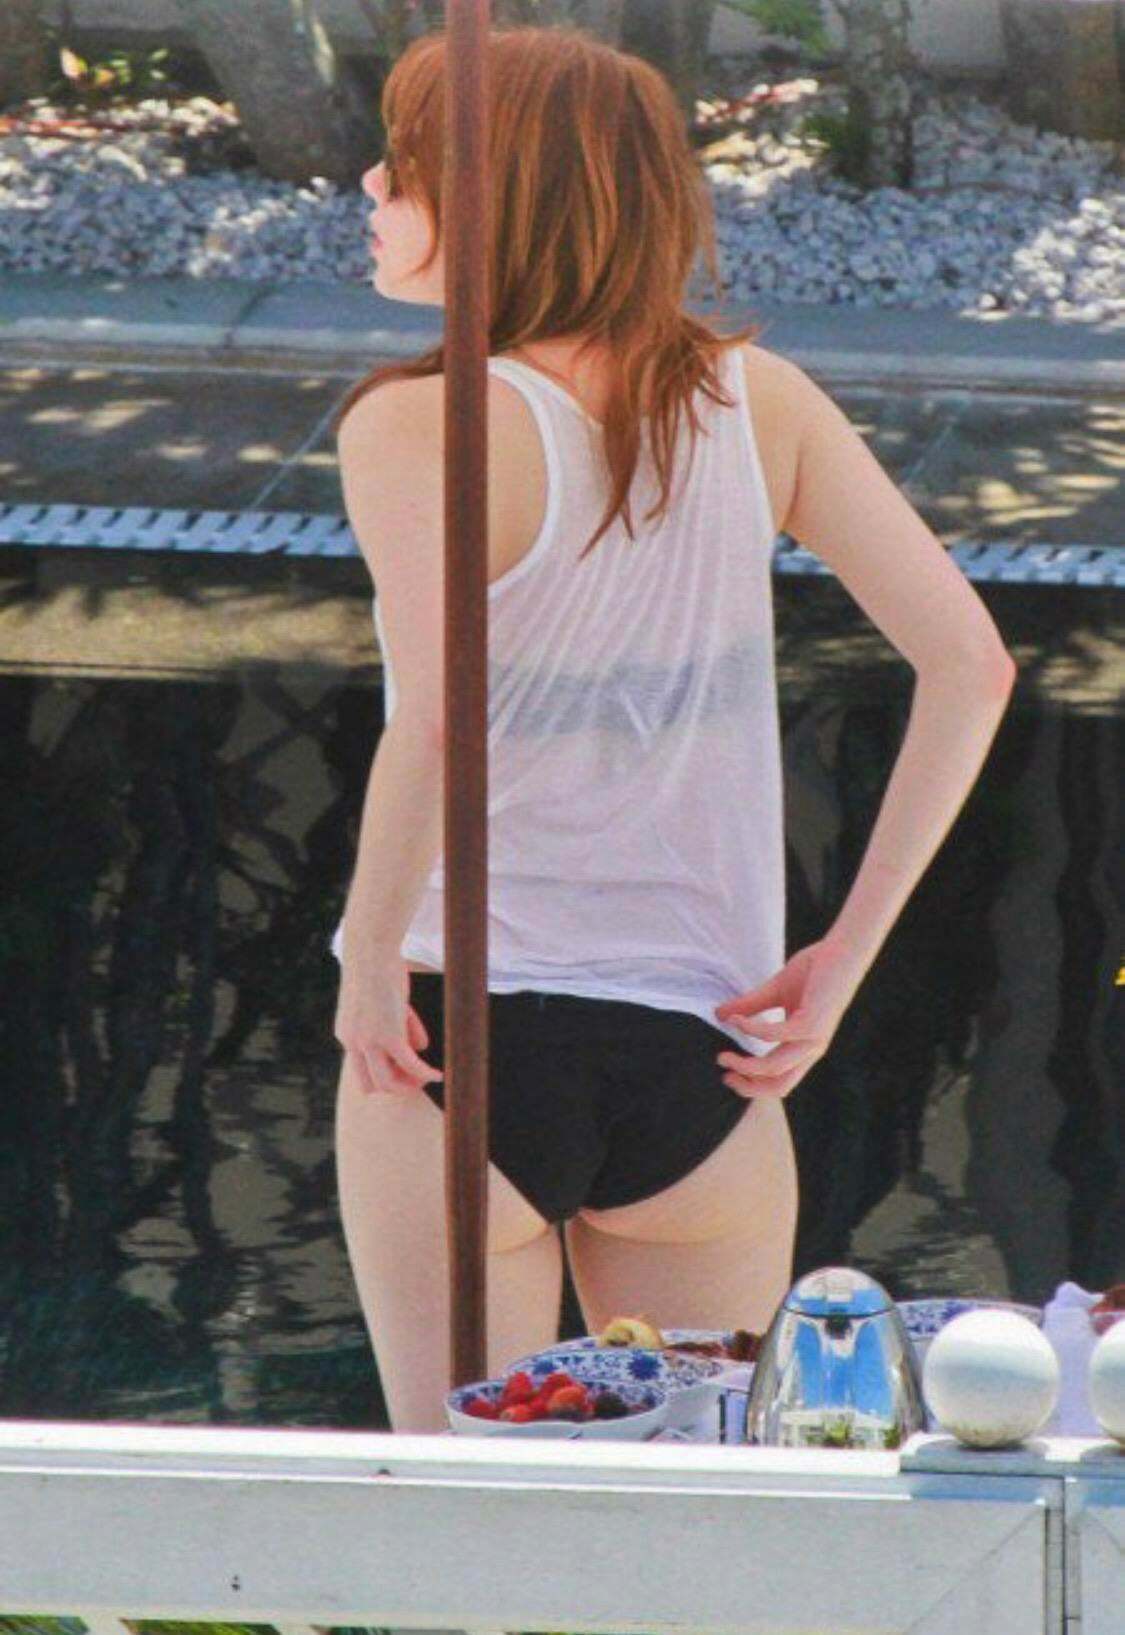 Id love to use Emma Stones pale body